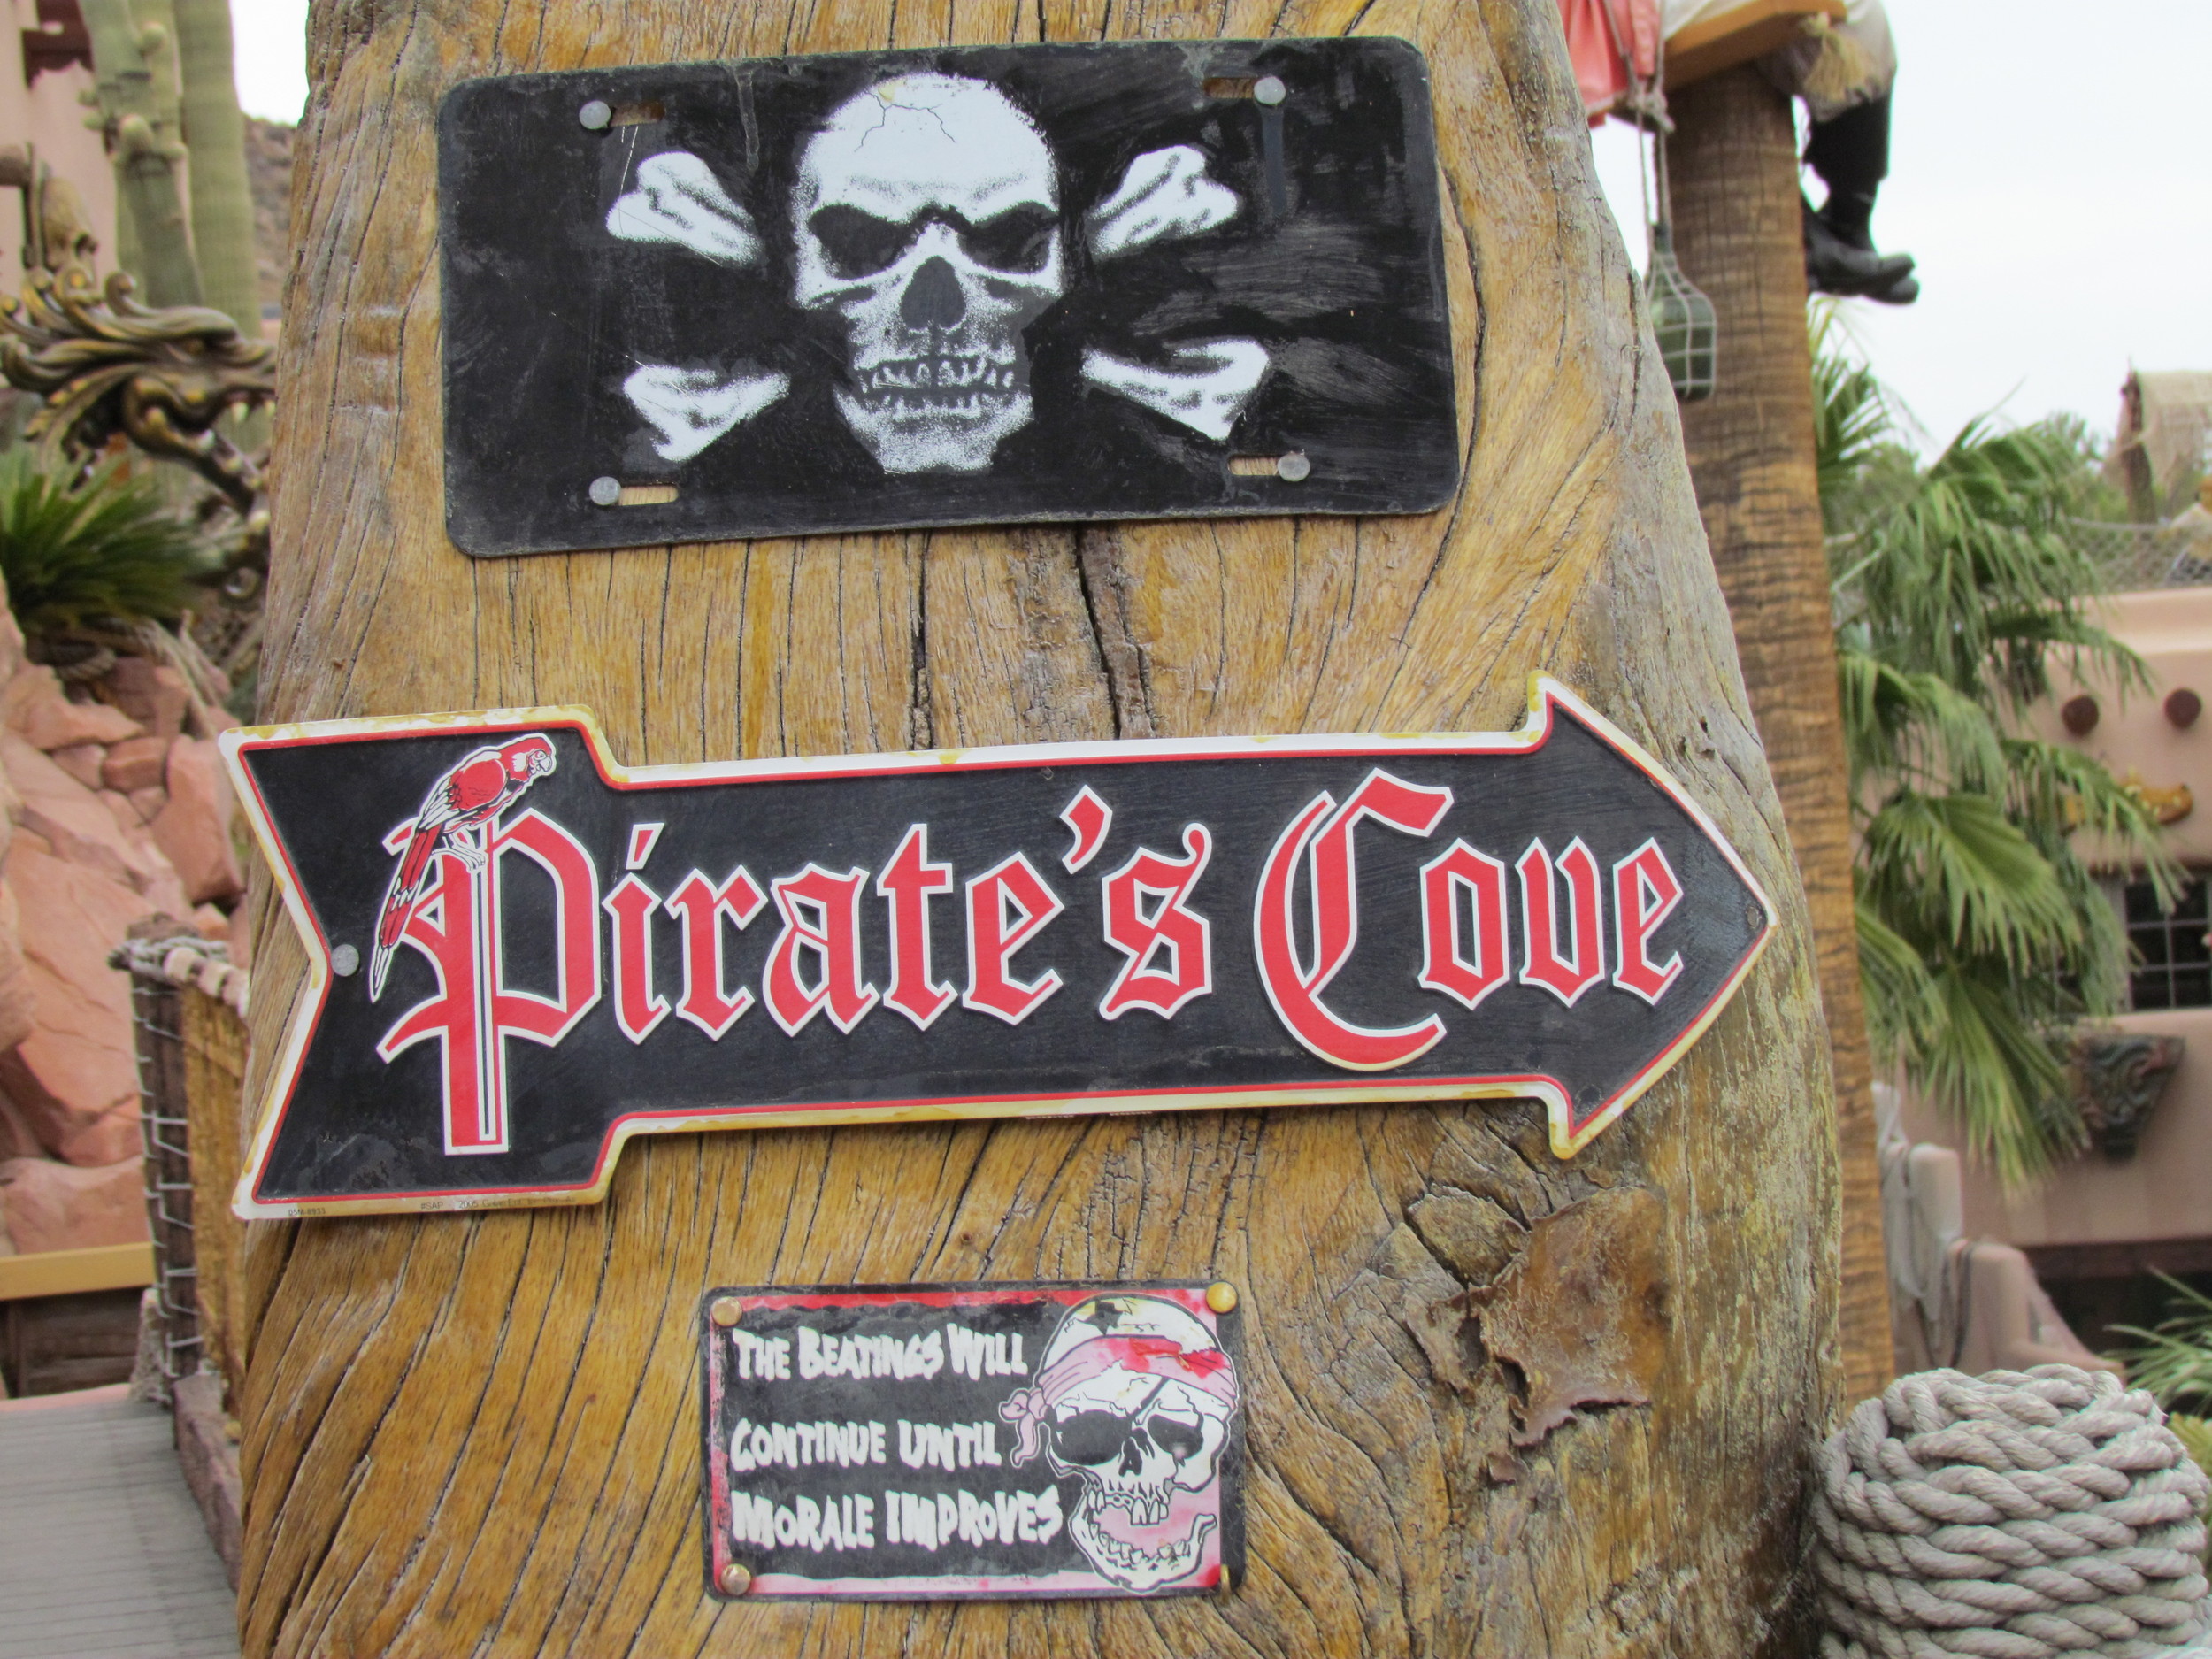 Pirate´s Cove is just a perfect name for this adventure park.  This is little example of the "decorations".